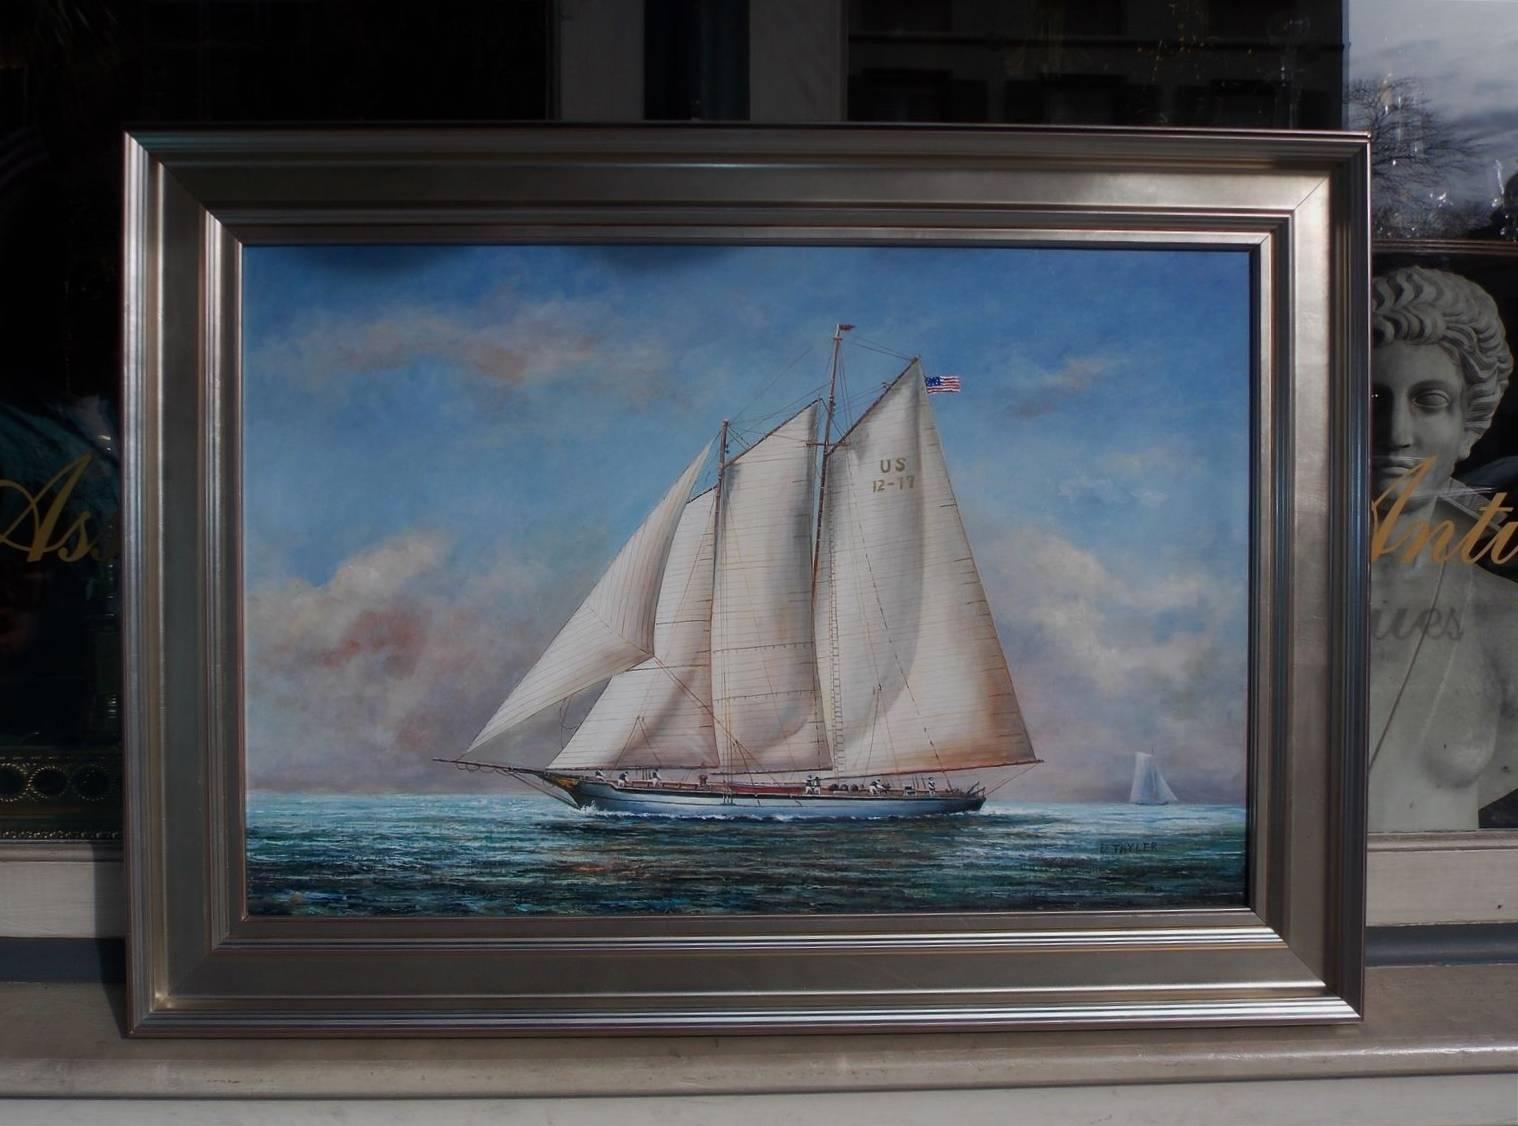 American Nautical oil on canvas of two masted schooner yacht under full sail with American flag, crew on deck, second vessel in distance, and mounted in a silver gilt frame, Early 20th century. Signed D. Thyler.